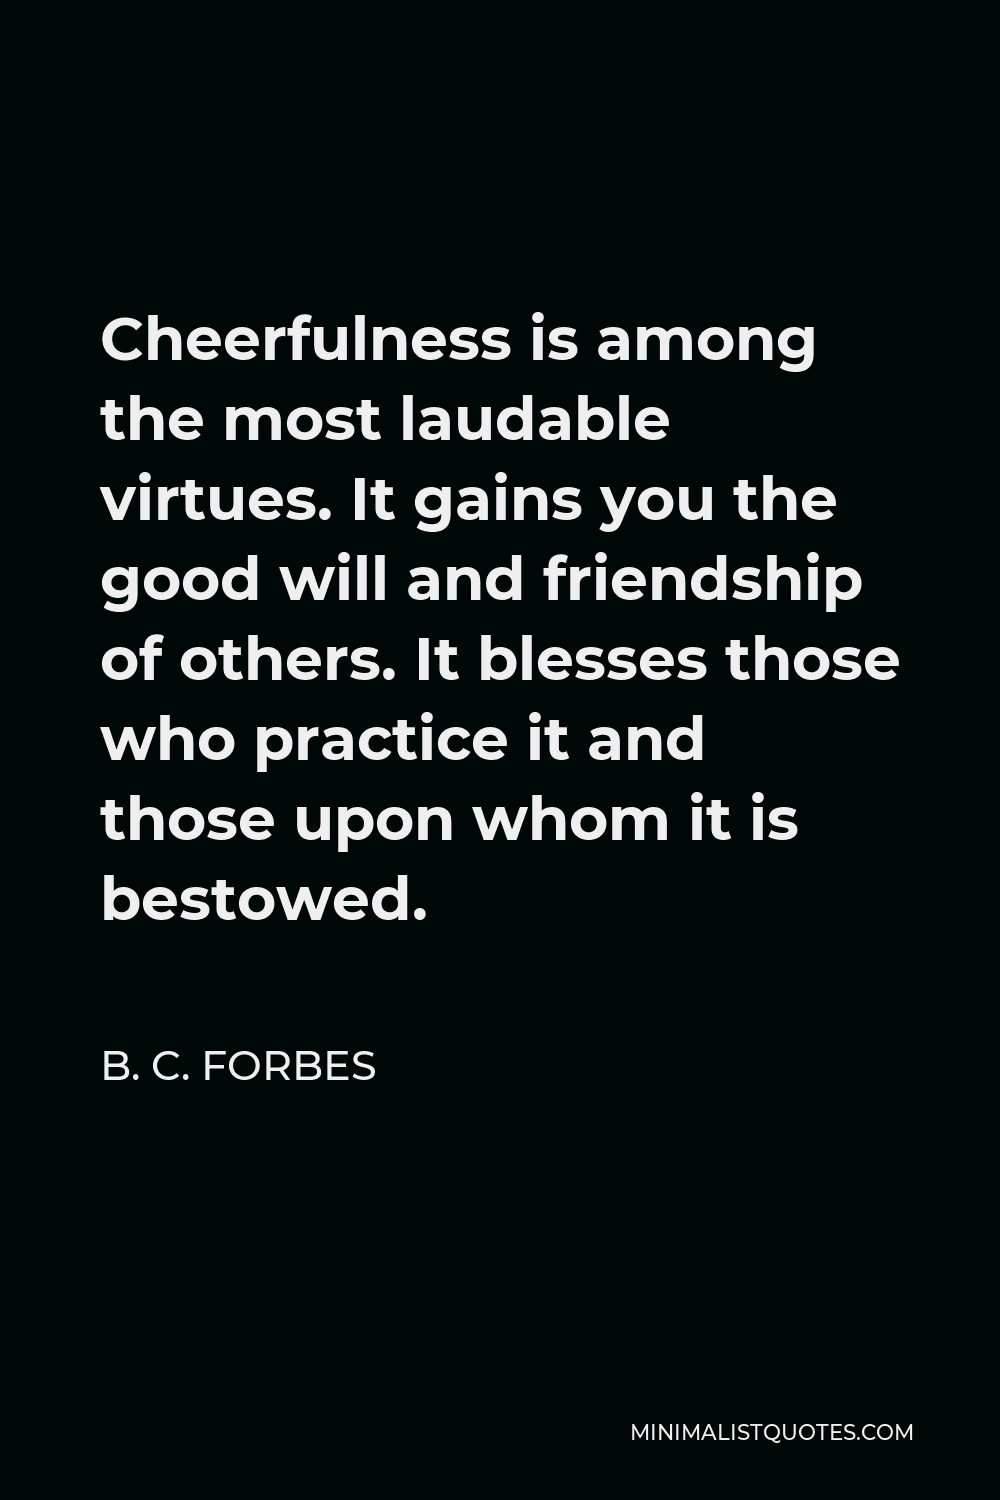 B. C. Forbes Quote - Cheerfulness is among the most laudable virtues. It gains you the good will and friendship of others. It blesses those who practice it and those upon whom it is bestowed.